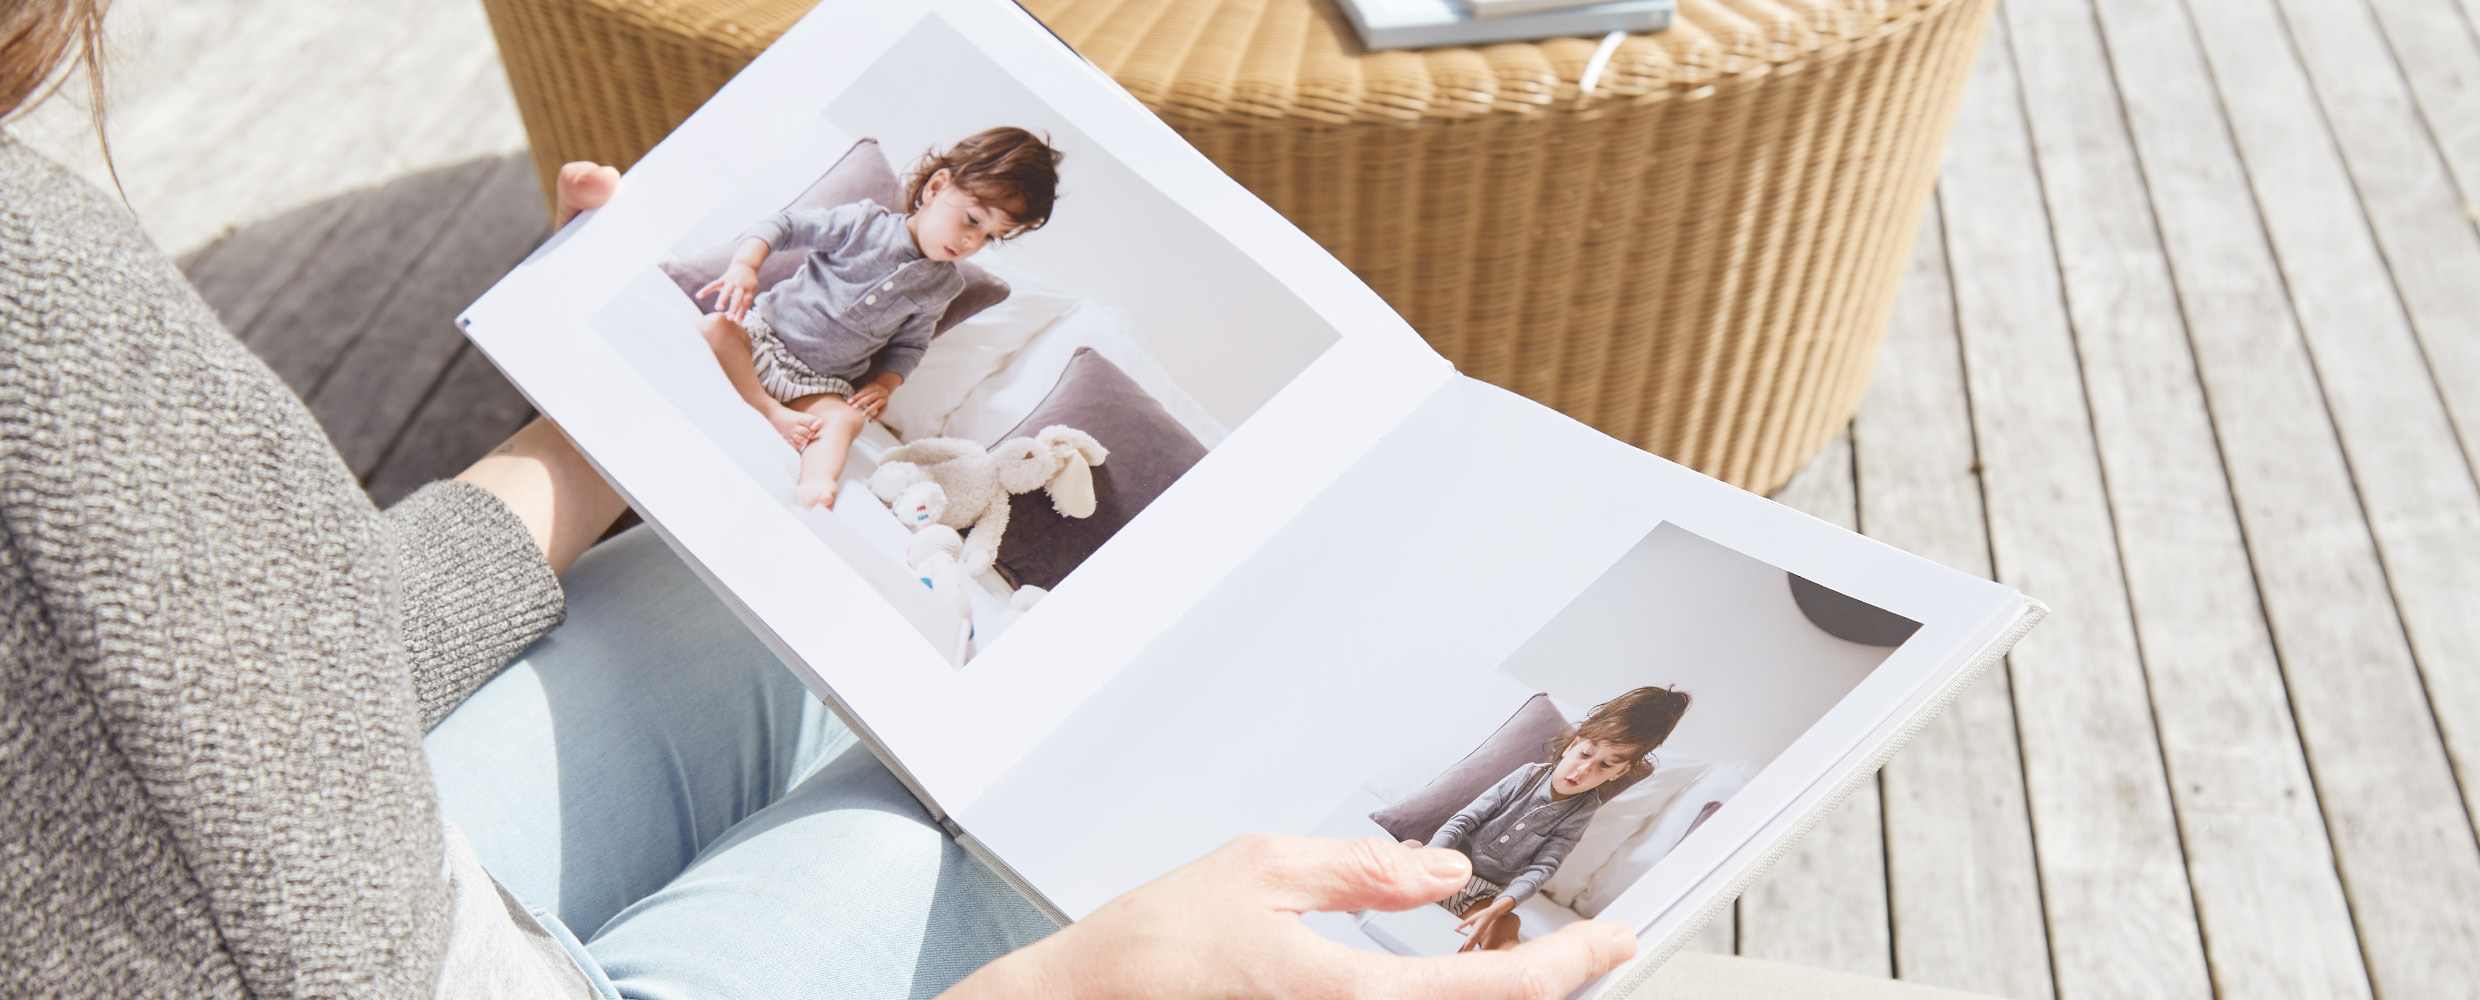 Woman outdoors flipping through open photo book with images of their child.